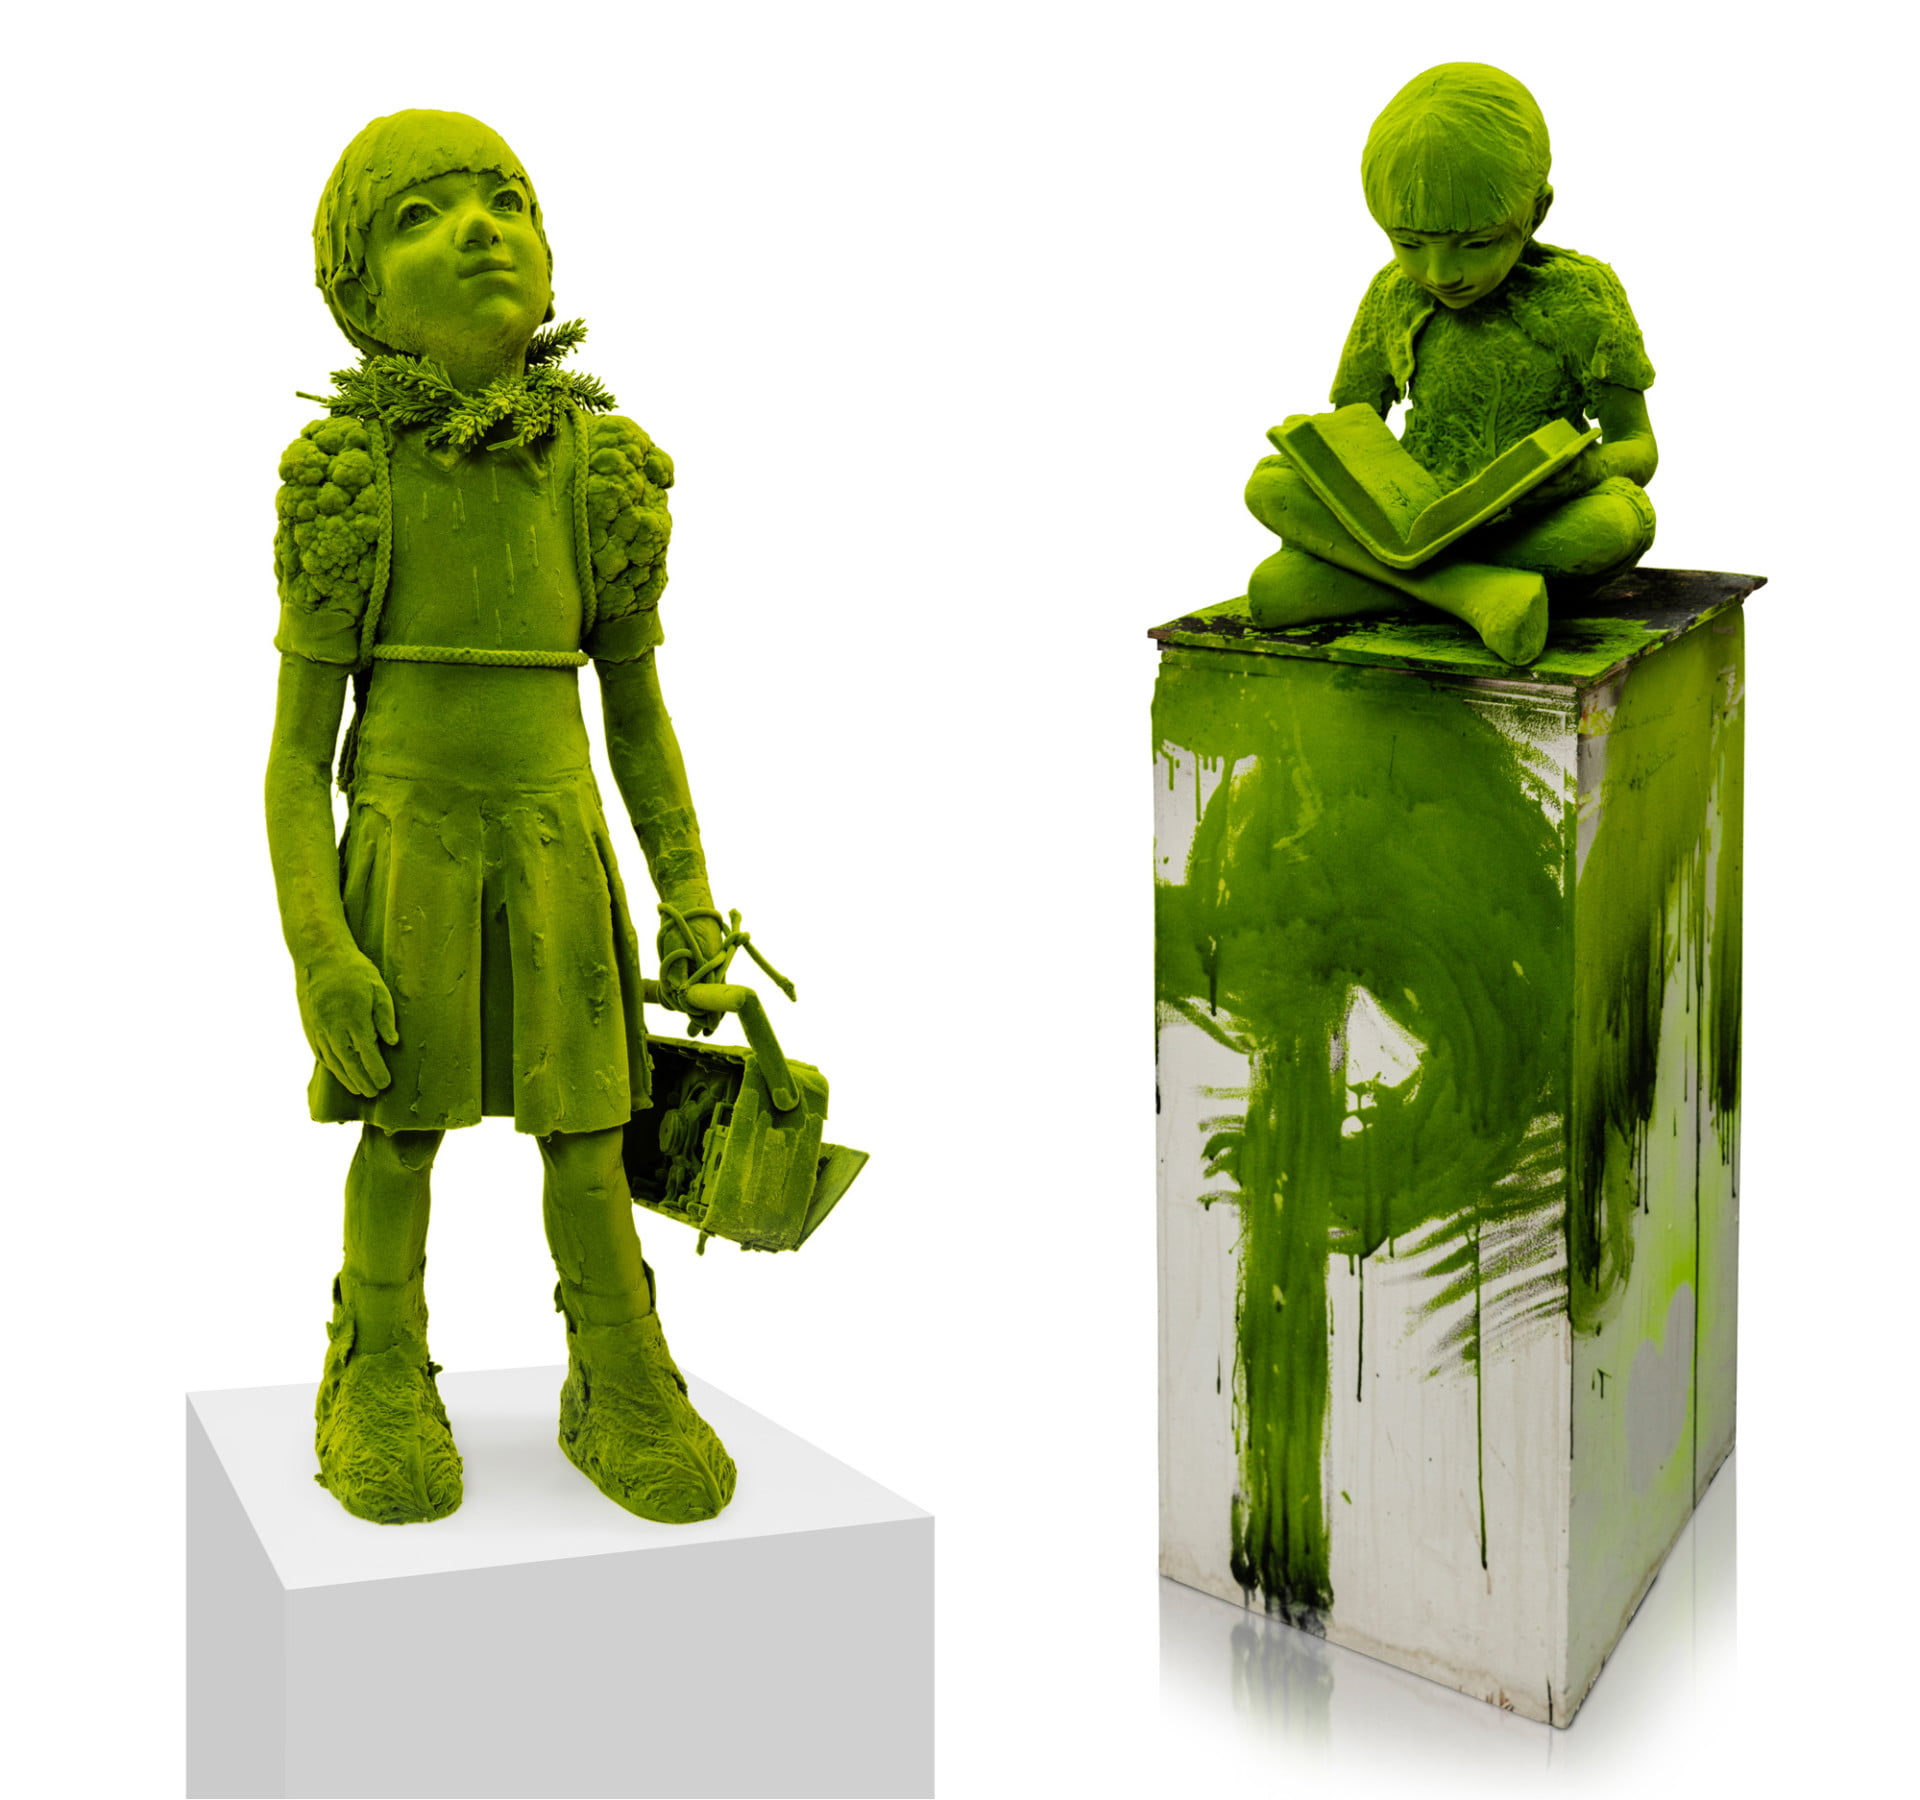 Two sculptures of young figures made from ceramic that are coated in green flocking to make them like they are coated in moss.